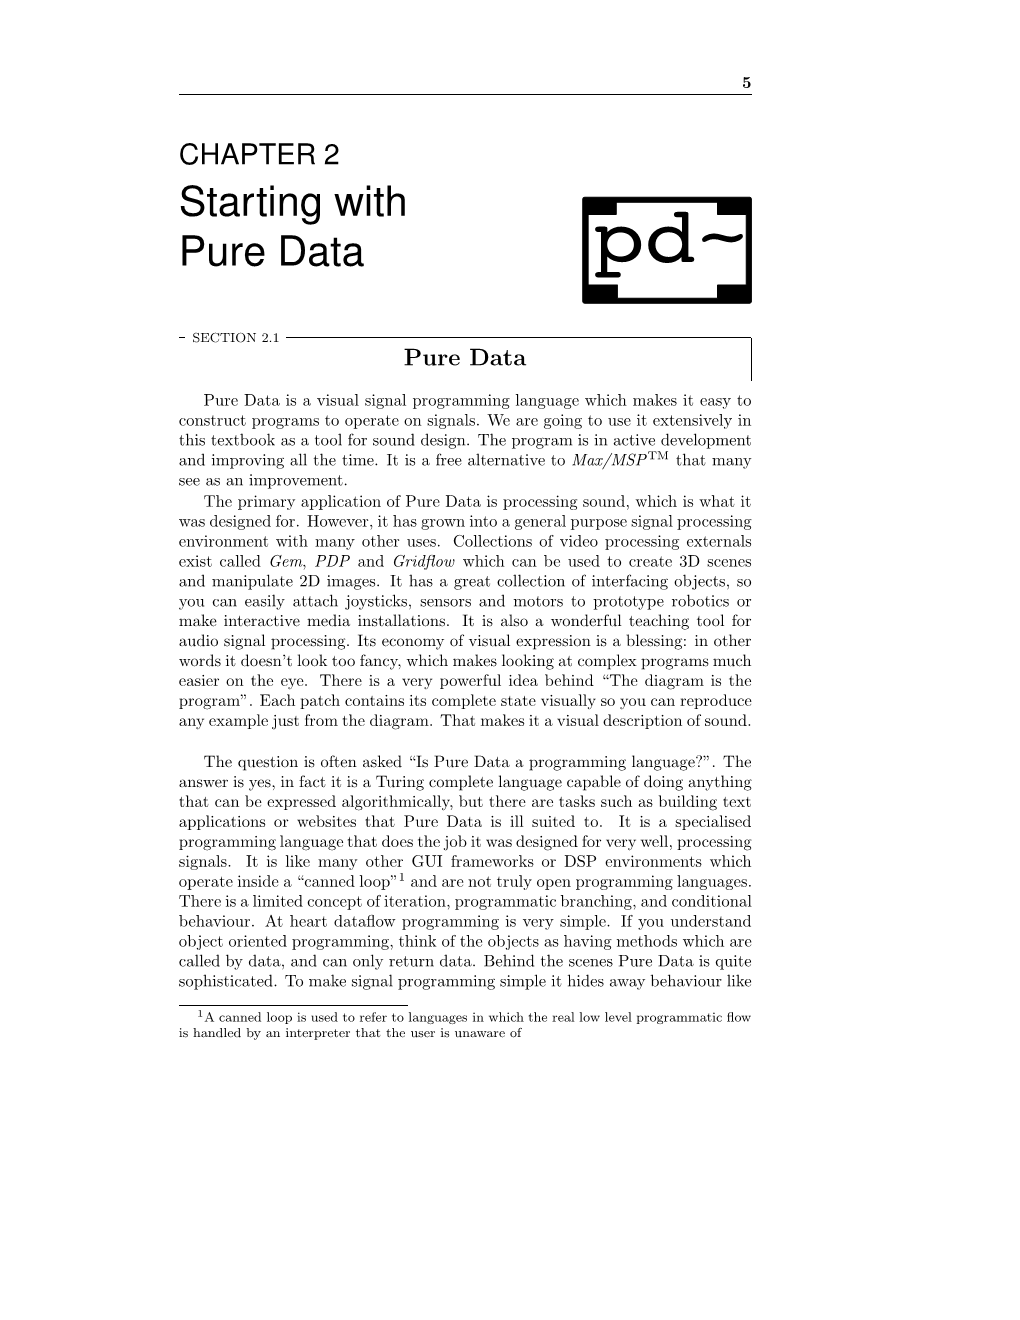 Starting with Pure Data